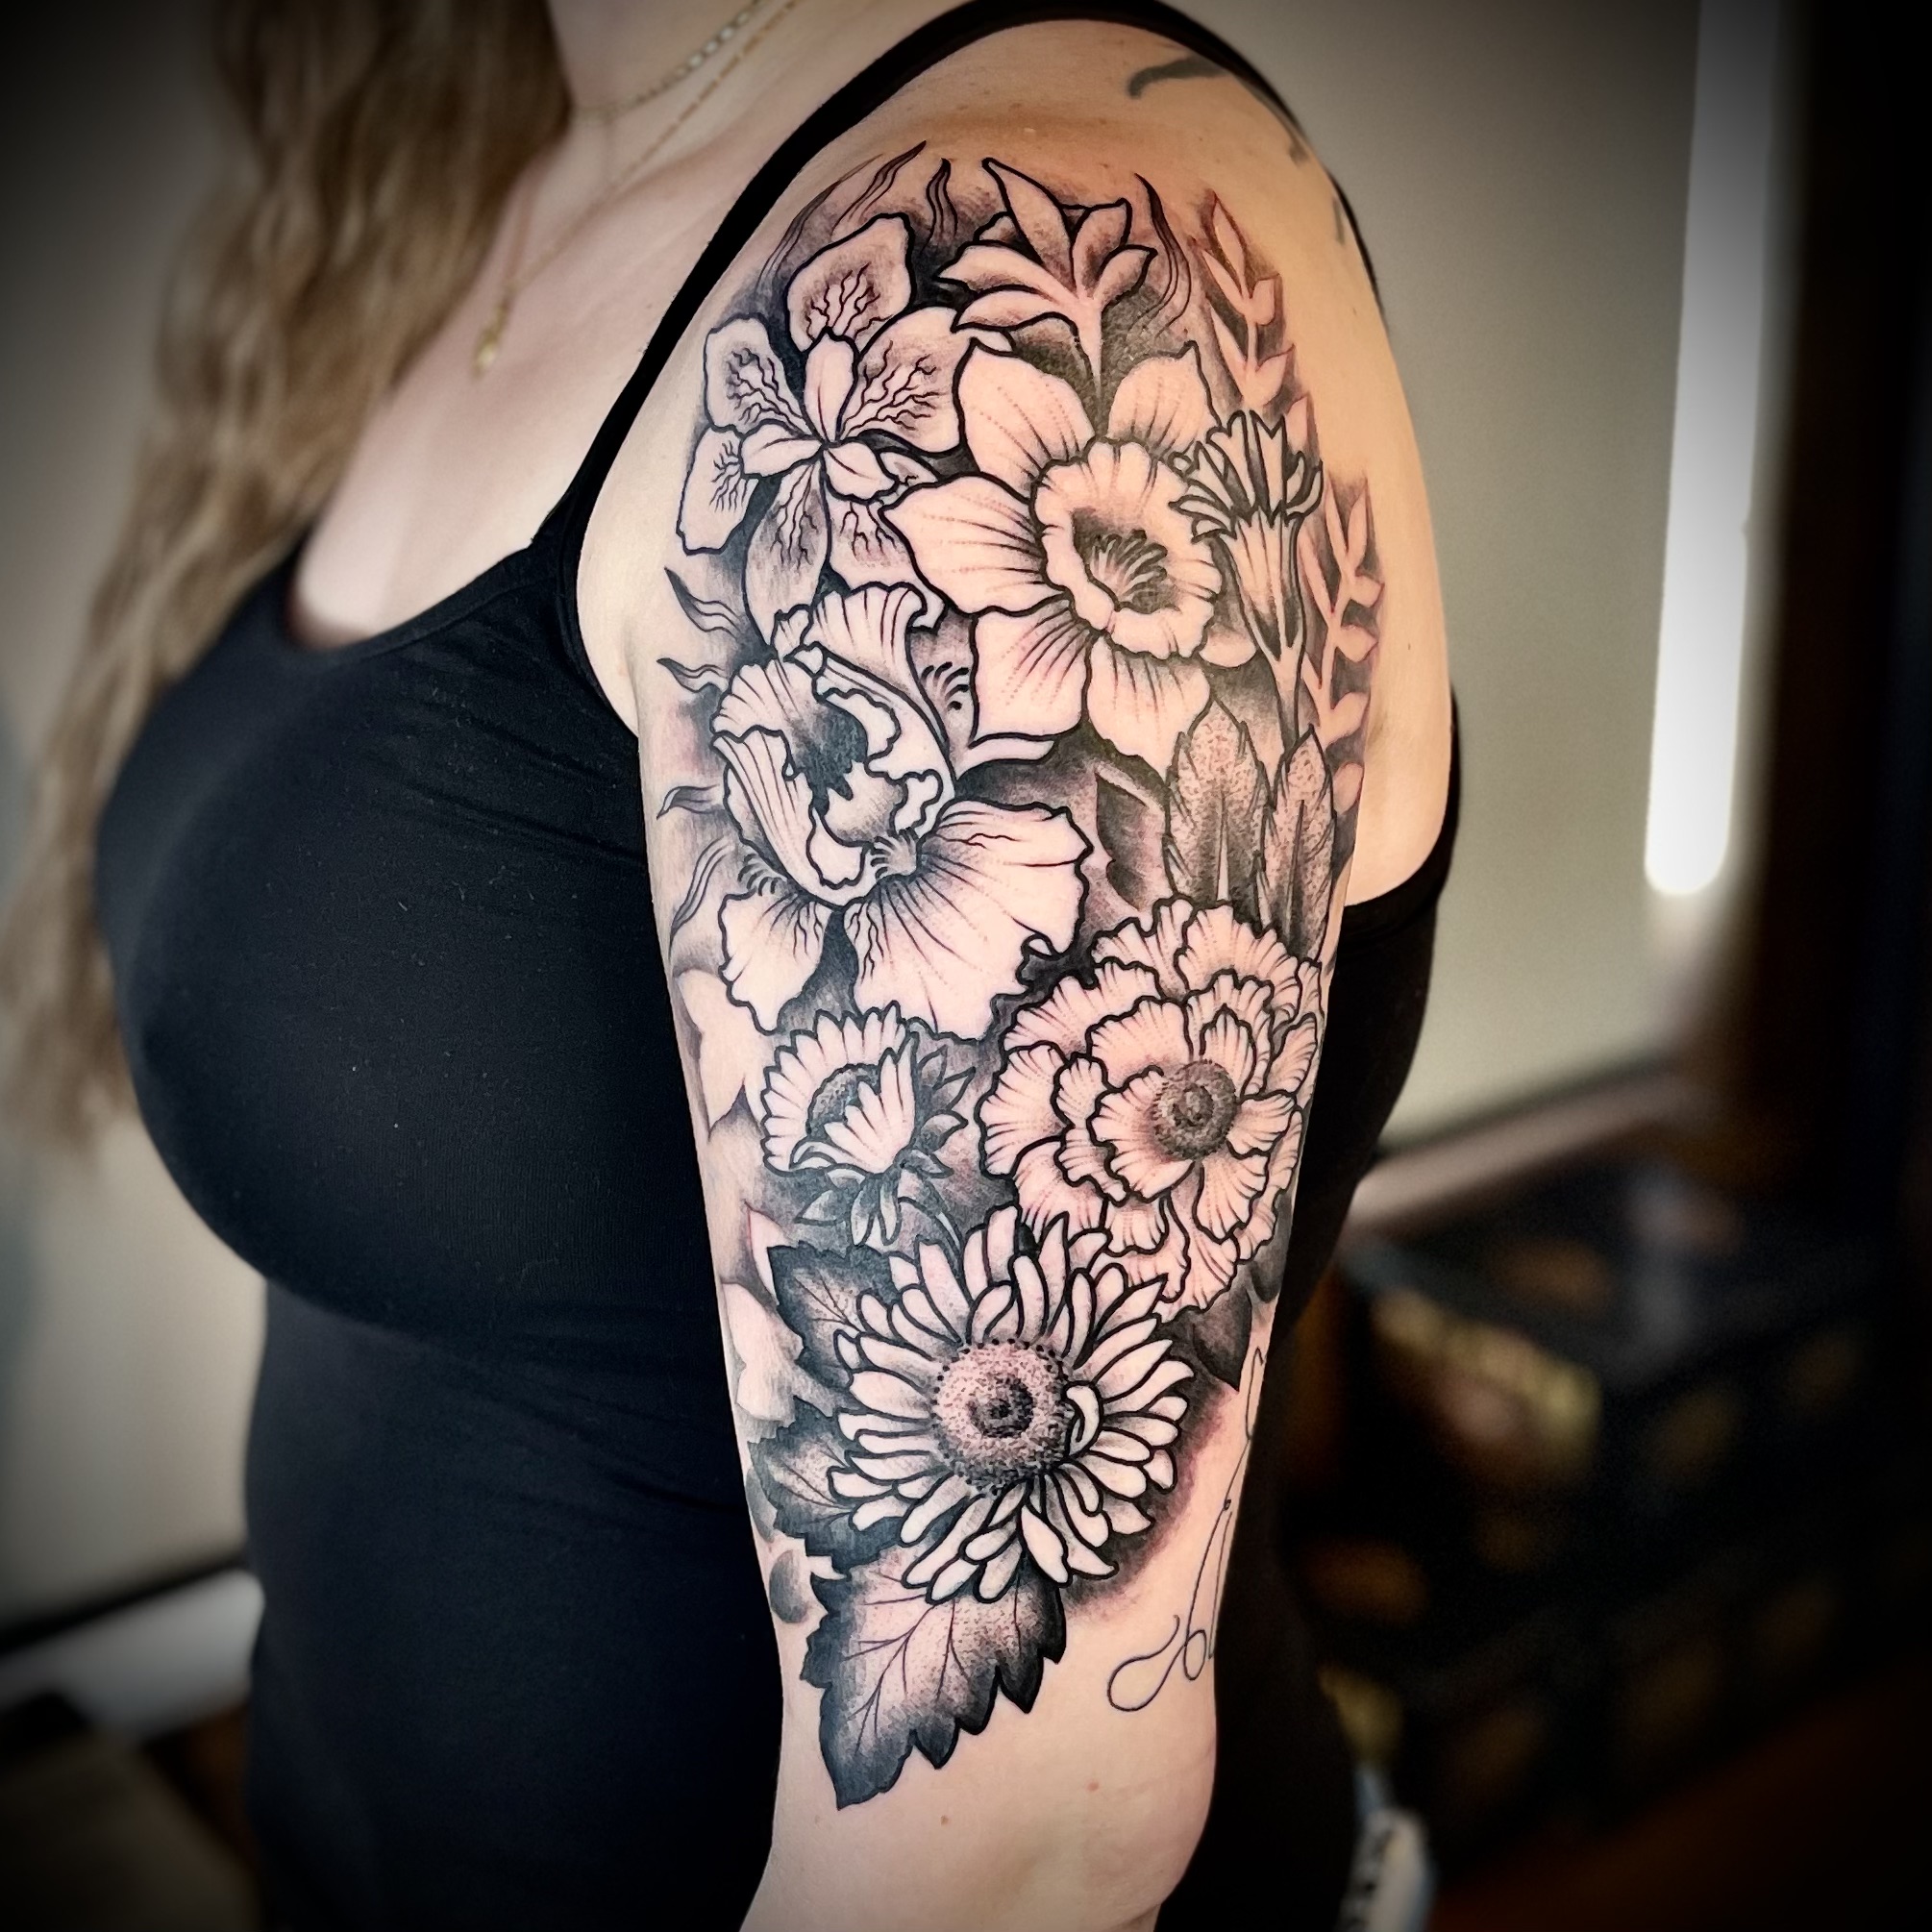 tattoo of flowers on a woman's shoulder from top DFW tattoo artist